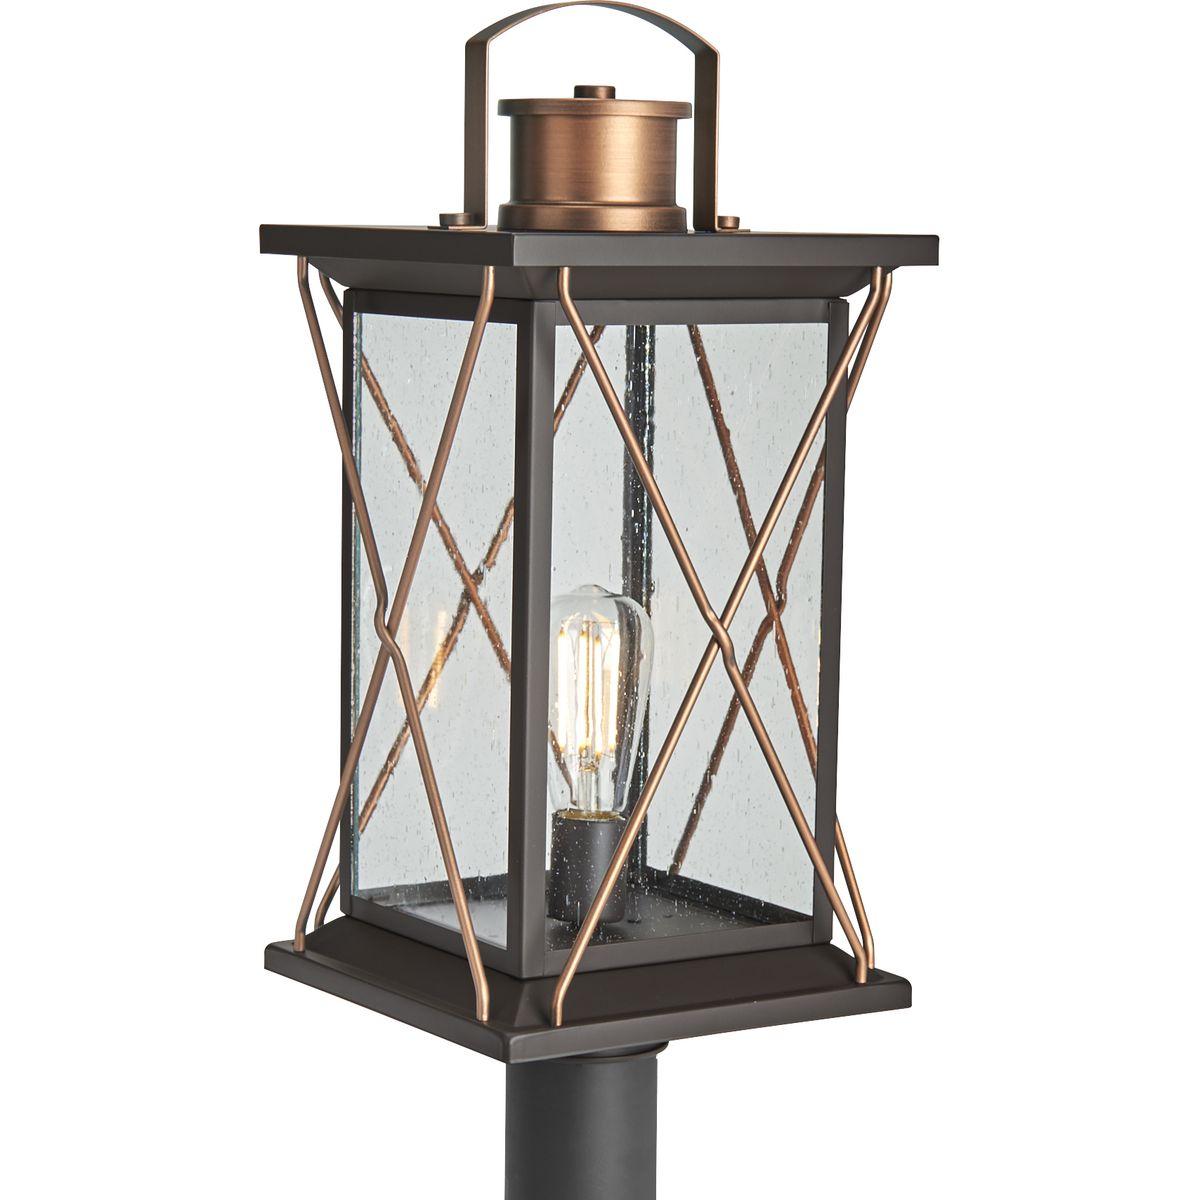 Hubbell P540068-020 Transform your home into a warm and cozy dream with the friendly farmhouse-style of this post lantern. A rustic X-brace design decorates each side of the charming lantern silhouette. Clear seeded glass panes add an extra pop of rustic personality. An anti